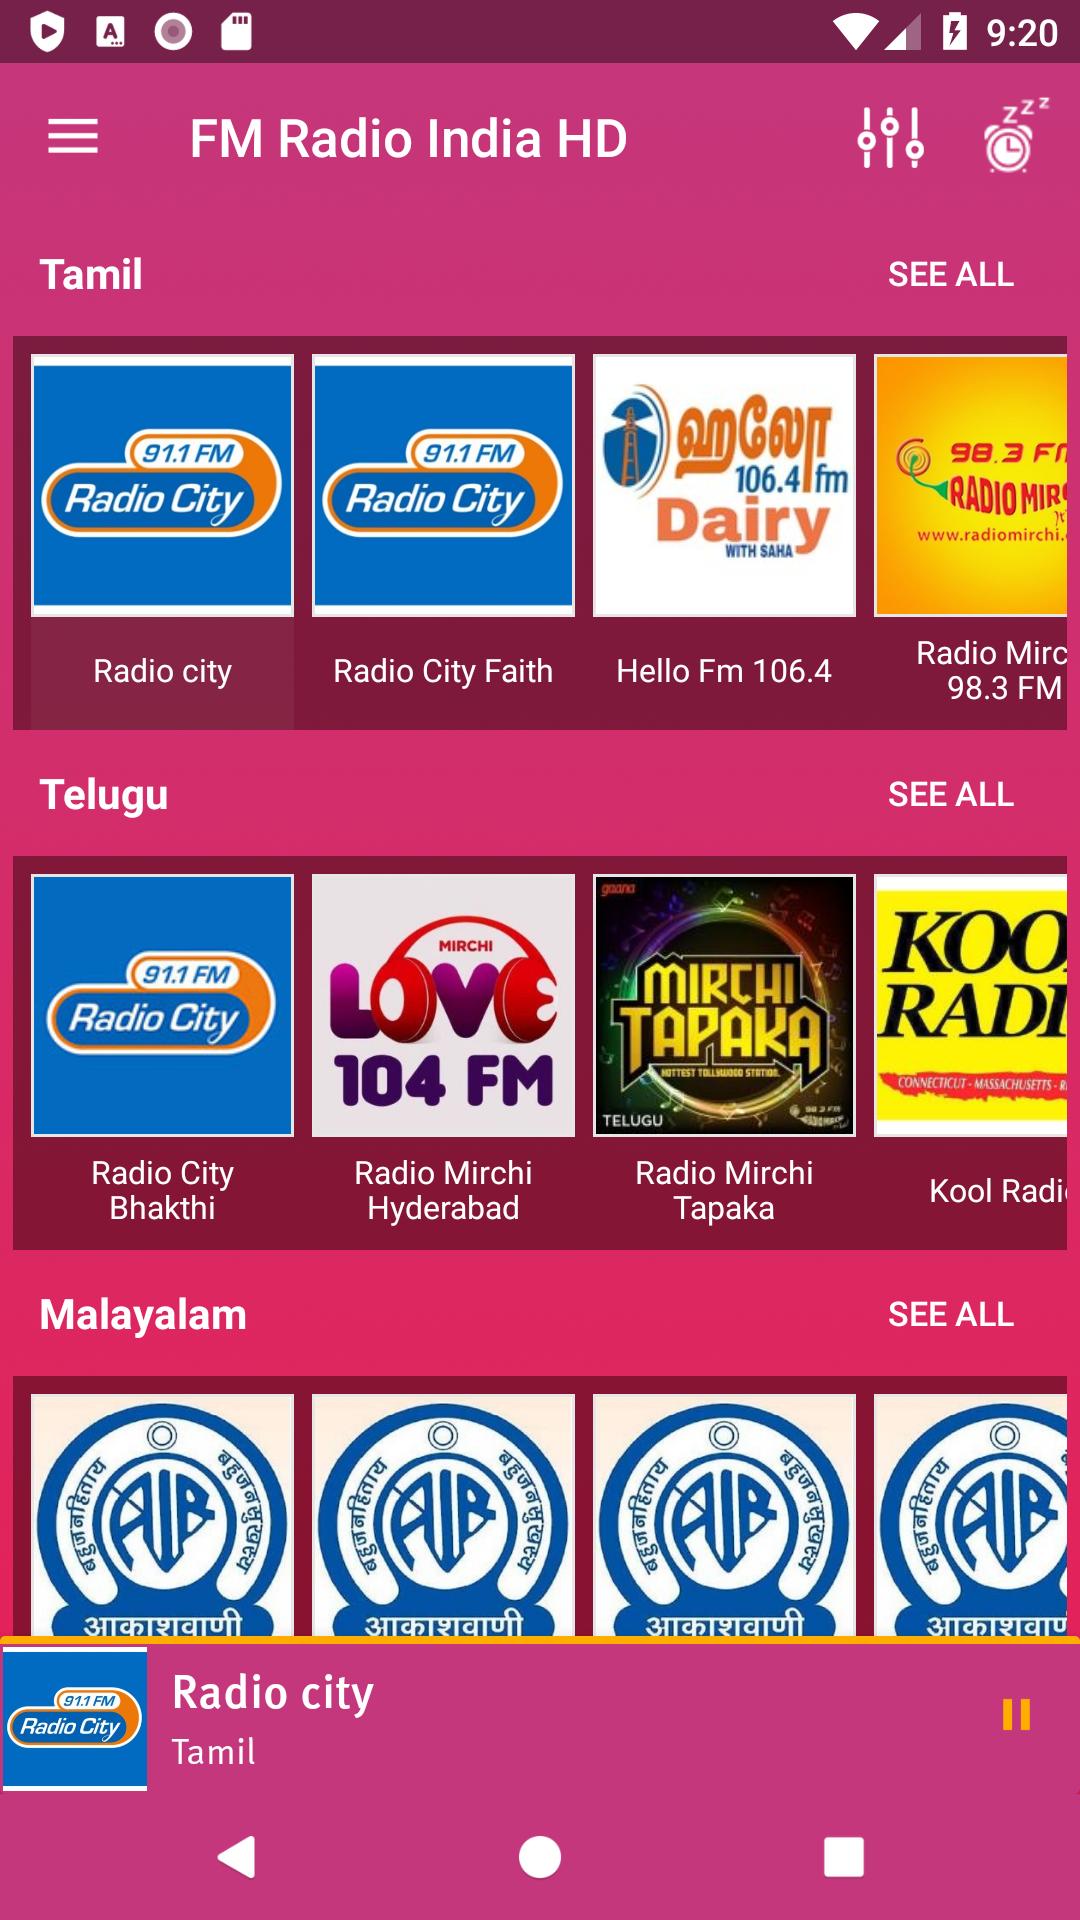 All India FM Radio - Online Web FM, AIR FM for Android - APK Download